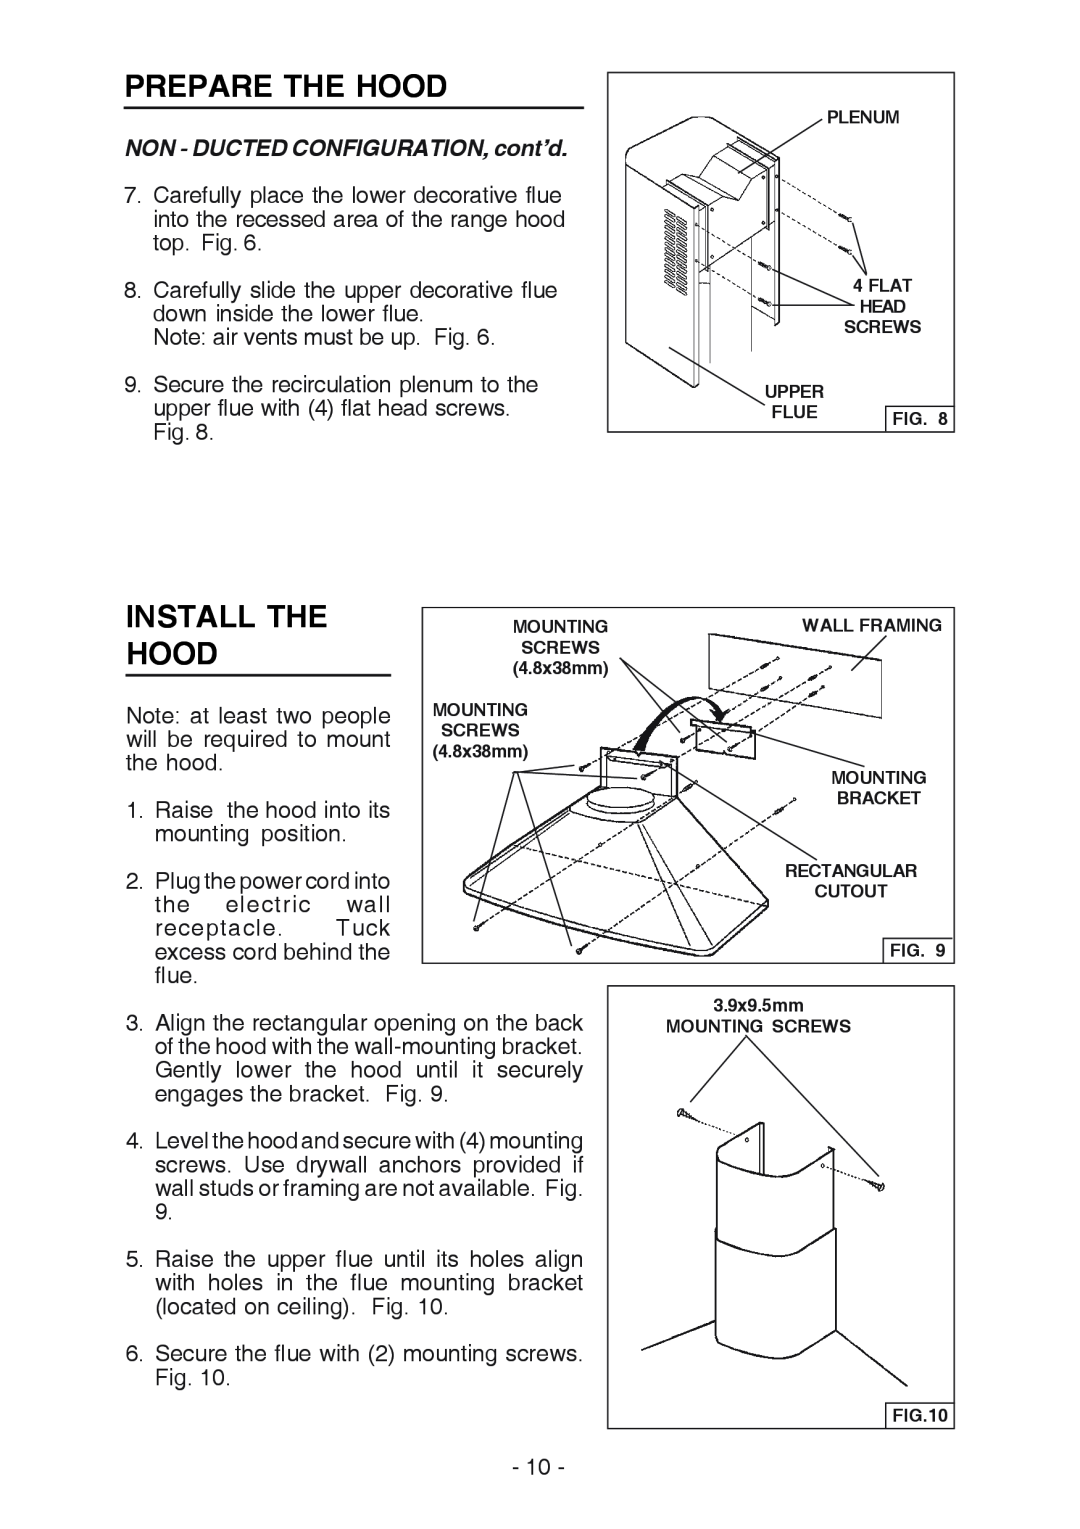 Best K3139 manual Install The Hood, NON - DUCTED CONFIGURATION, cont’d, Prepare The Hood 